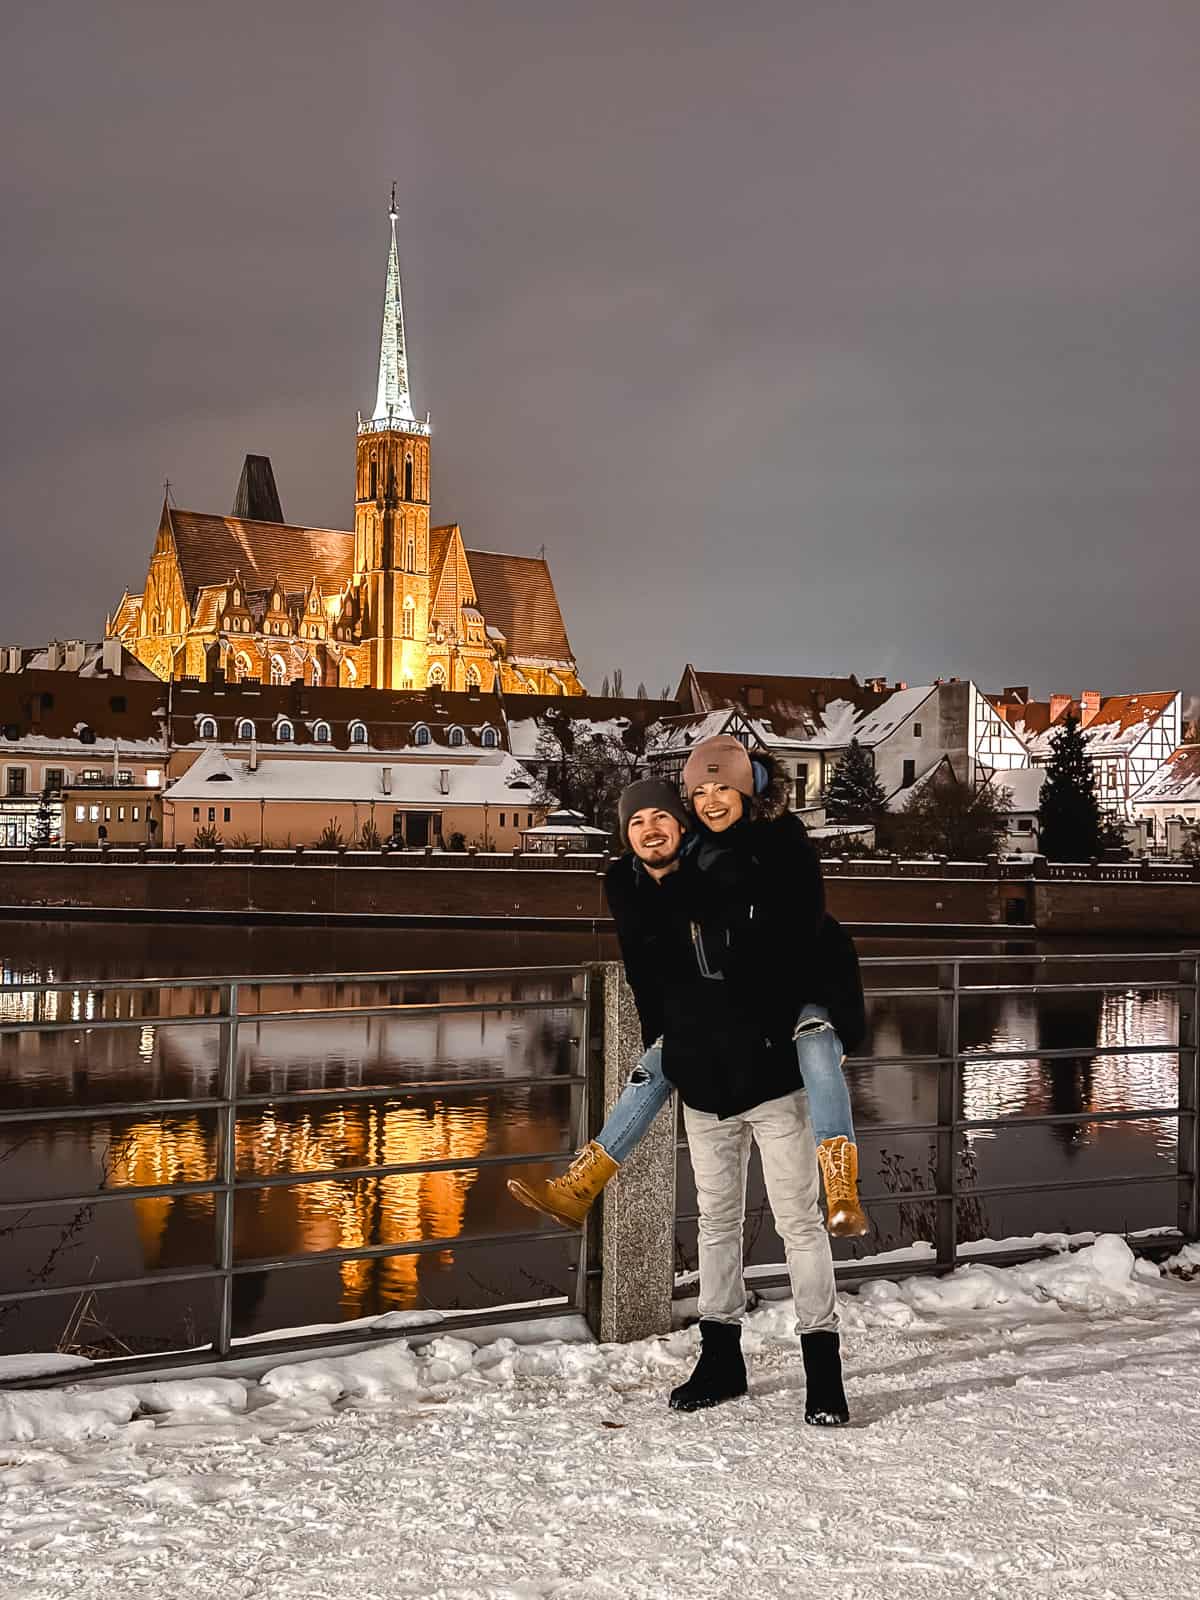 A smiling couple stands in the snow at night, with the illuminated Gothic architecture of Wroclaw’s Cathedral reflecting in the Oder River behind them